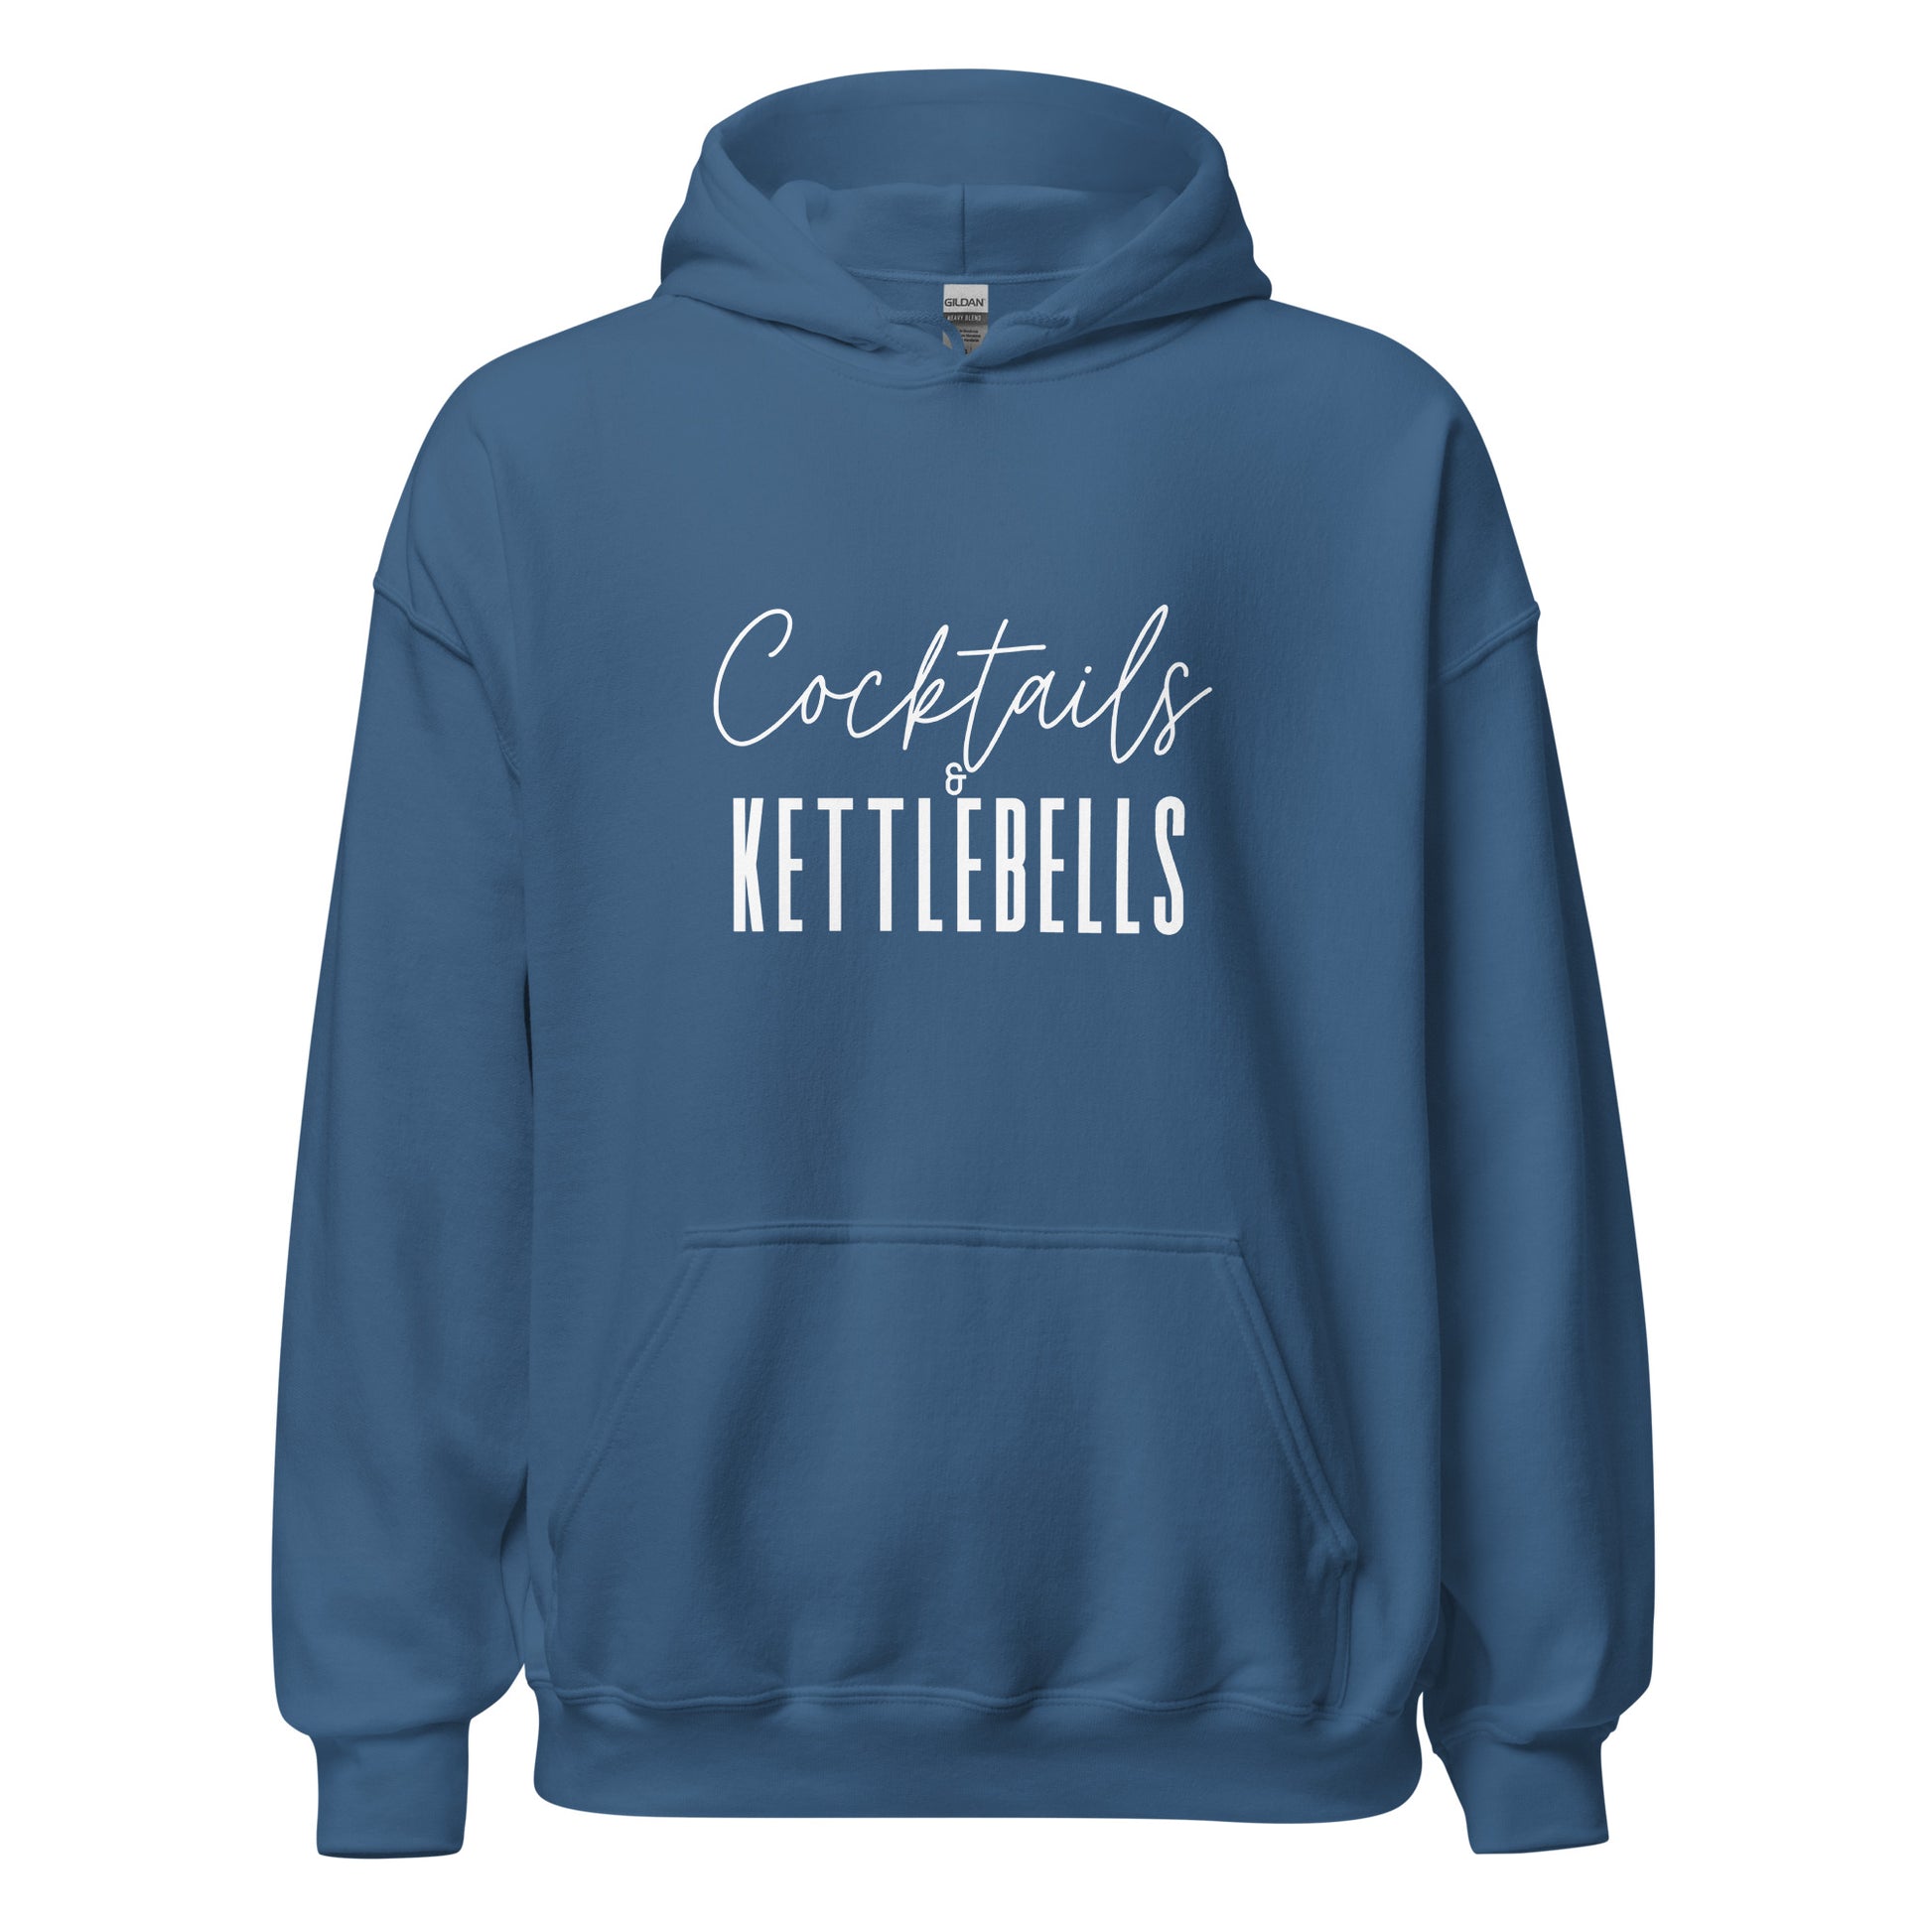 dusky blue hoodie with the words cocktails and kettlebells in a white font across the chest